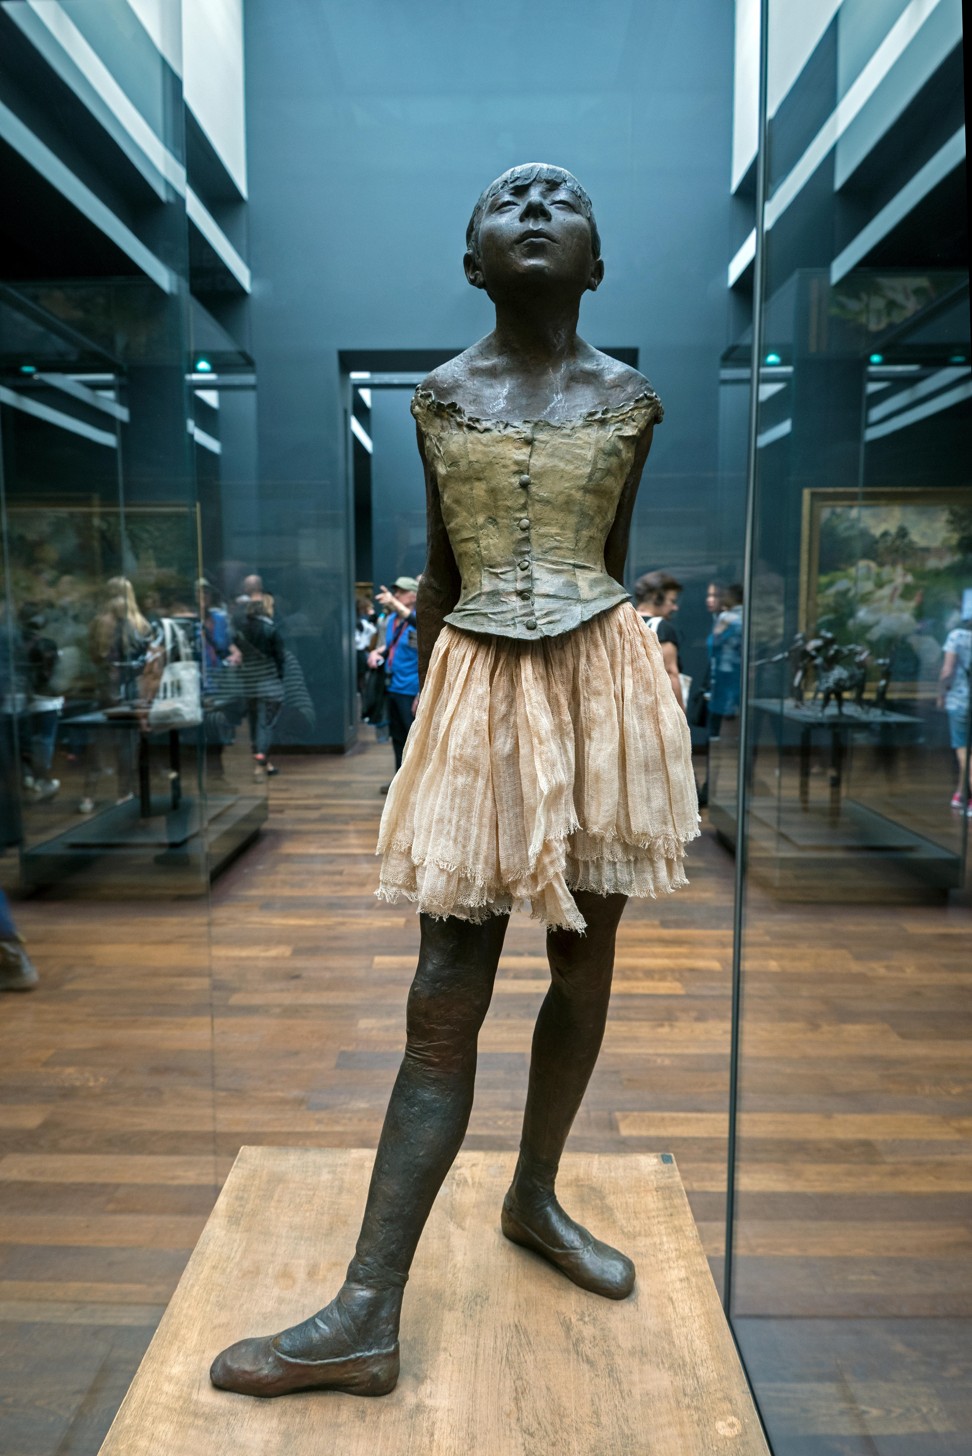 ‘Little Dancer of Fourteen Years’ (1881), a sculpture by Degas in the Musee d'Orsay, Paris. Photo: Alamy